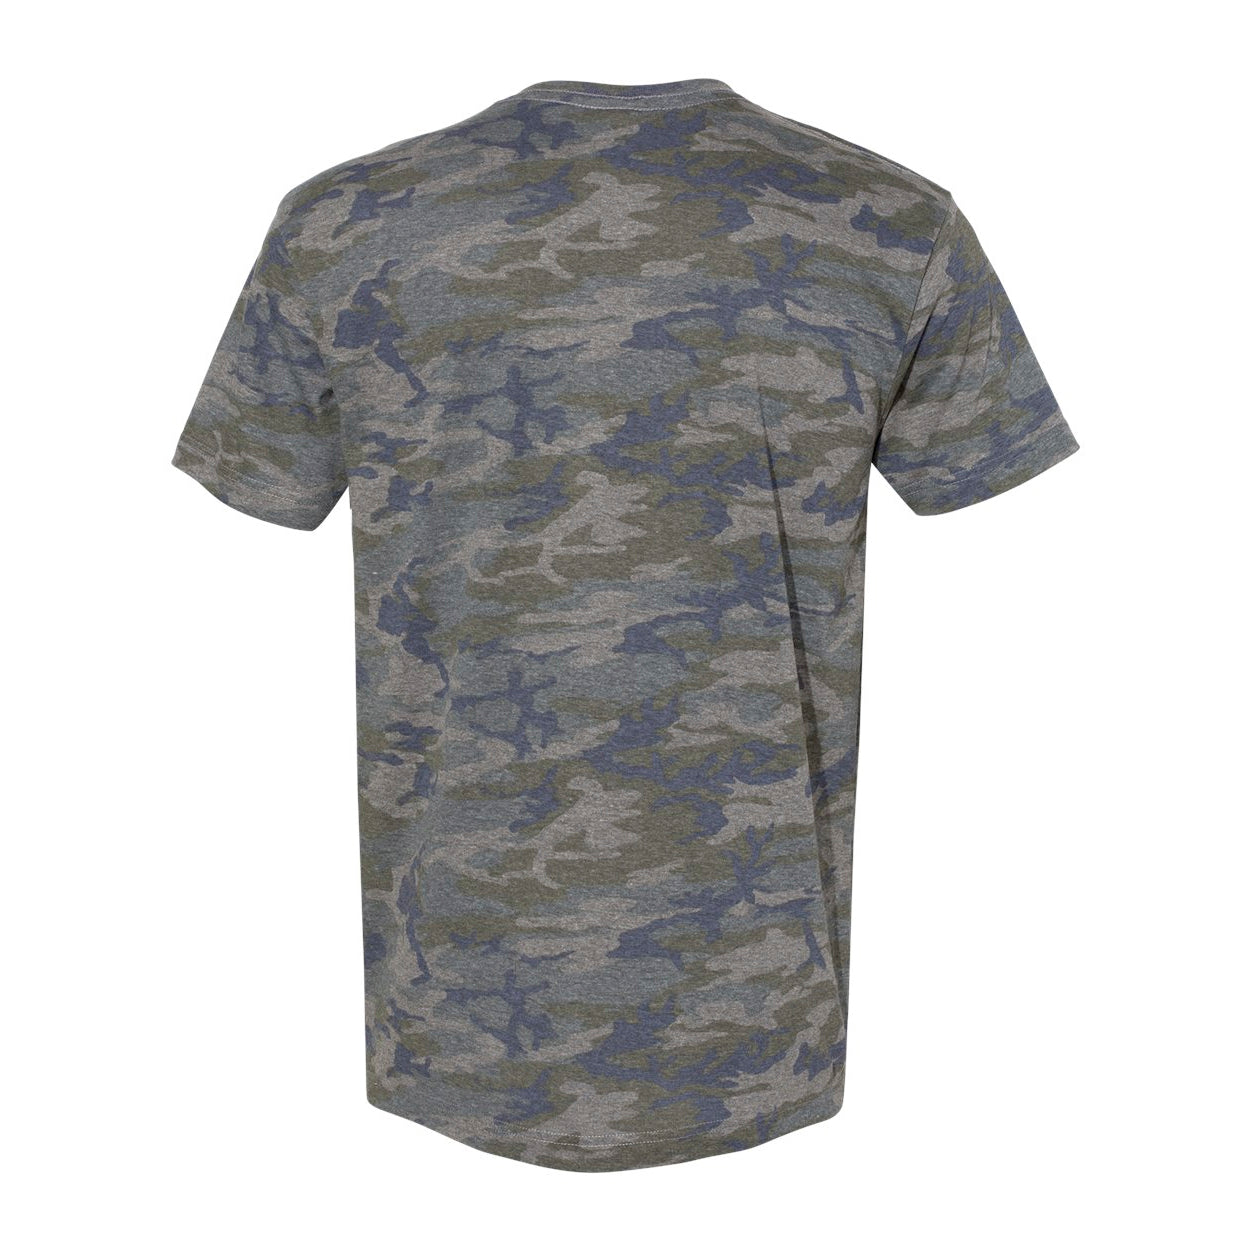 THE MAX TEE - Olive Navy Camo Men's Knit T-Shirt By Robert James